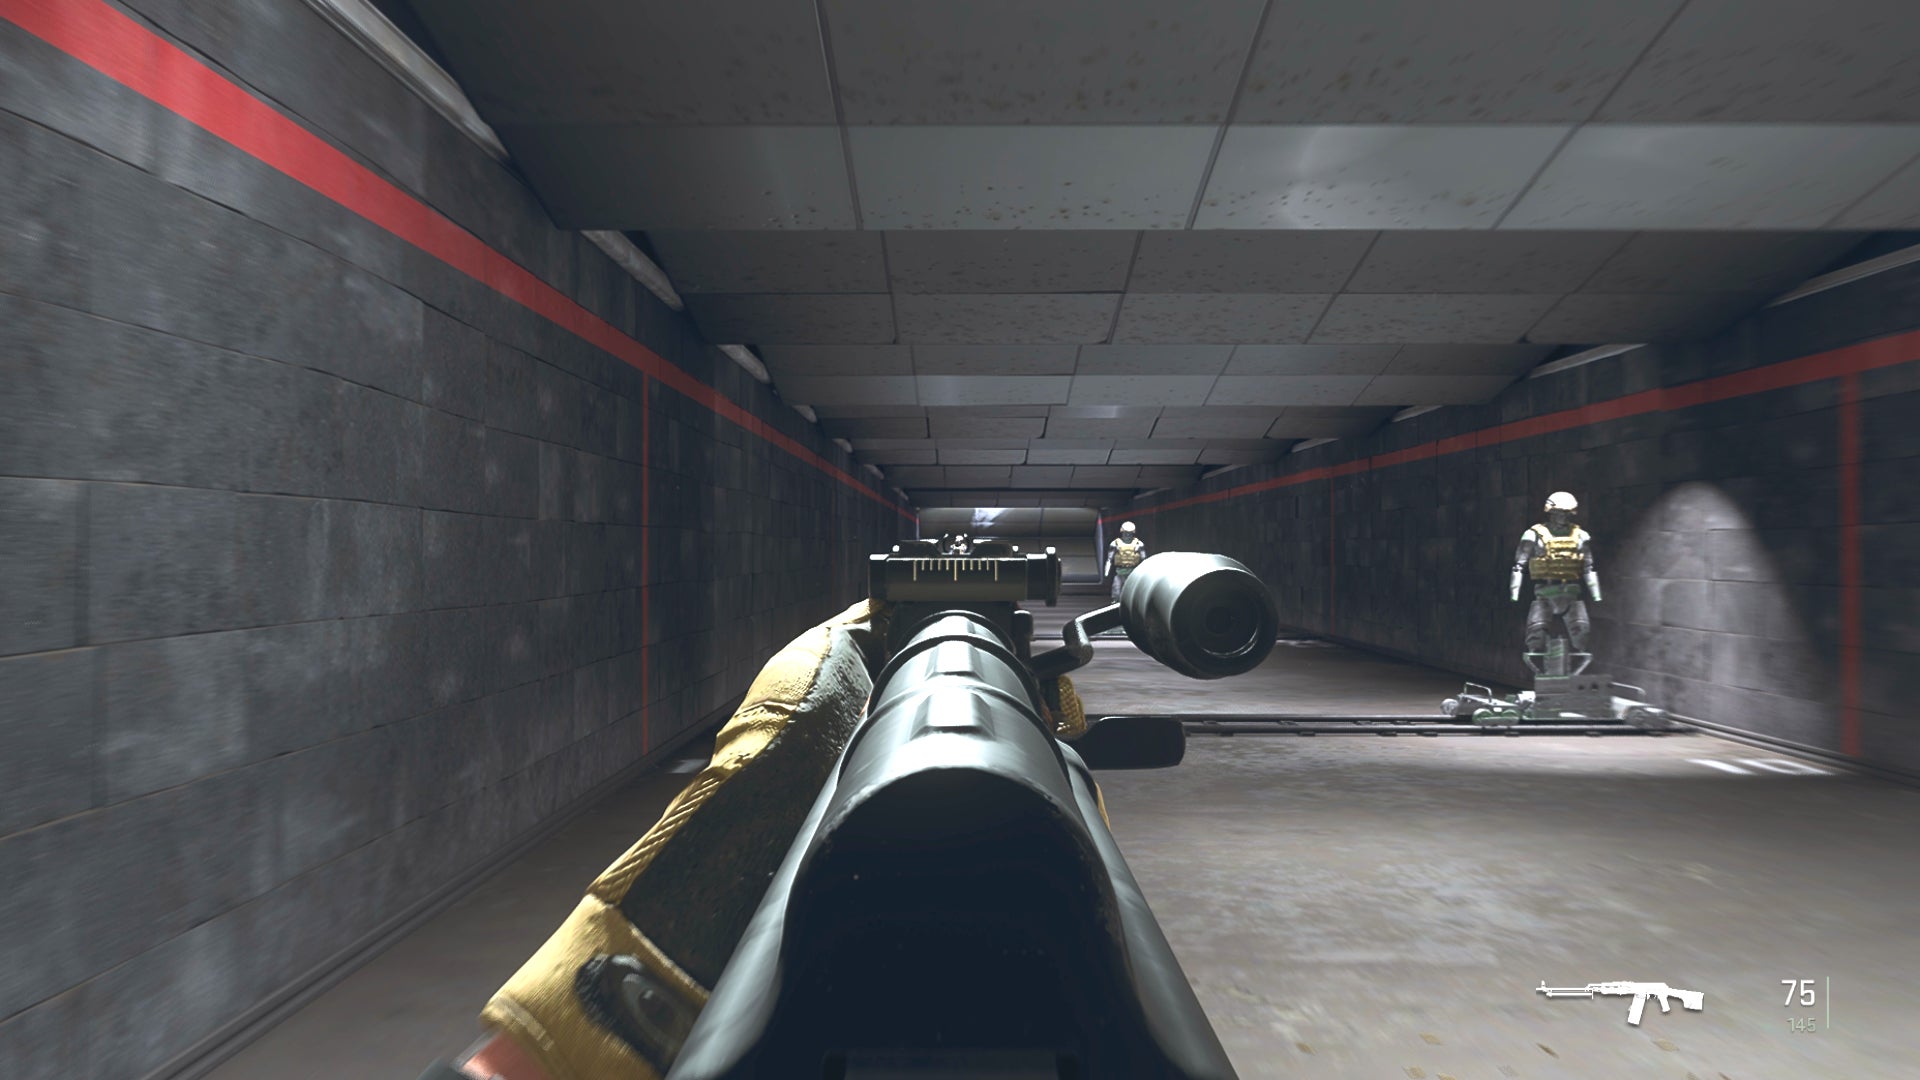 The player in Warzone 2.0 aims at a training dummy with the RPK ironsights.